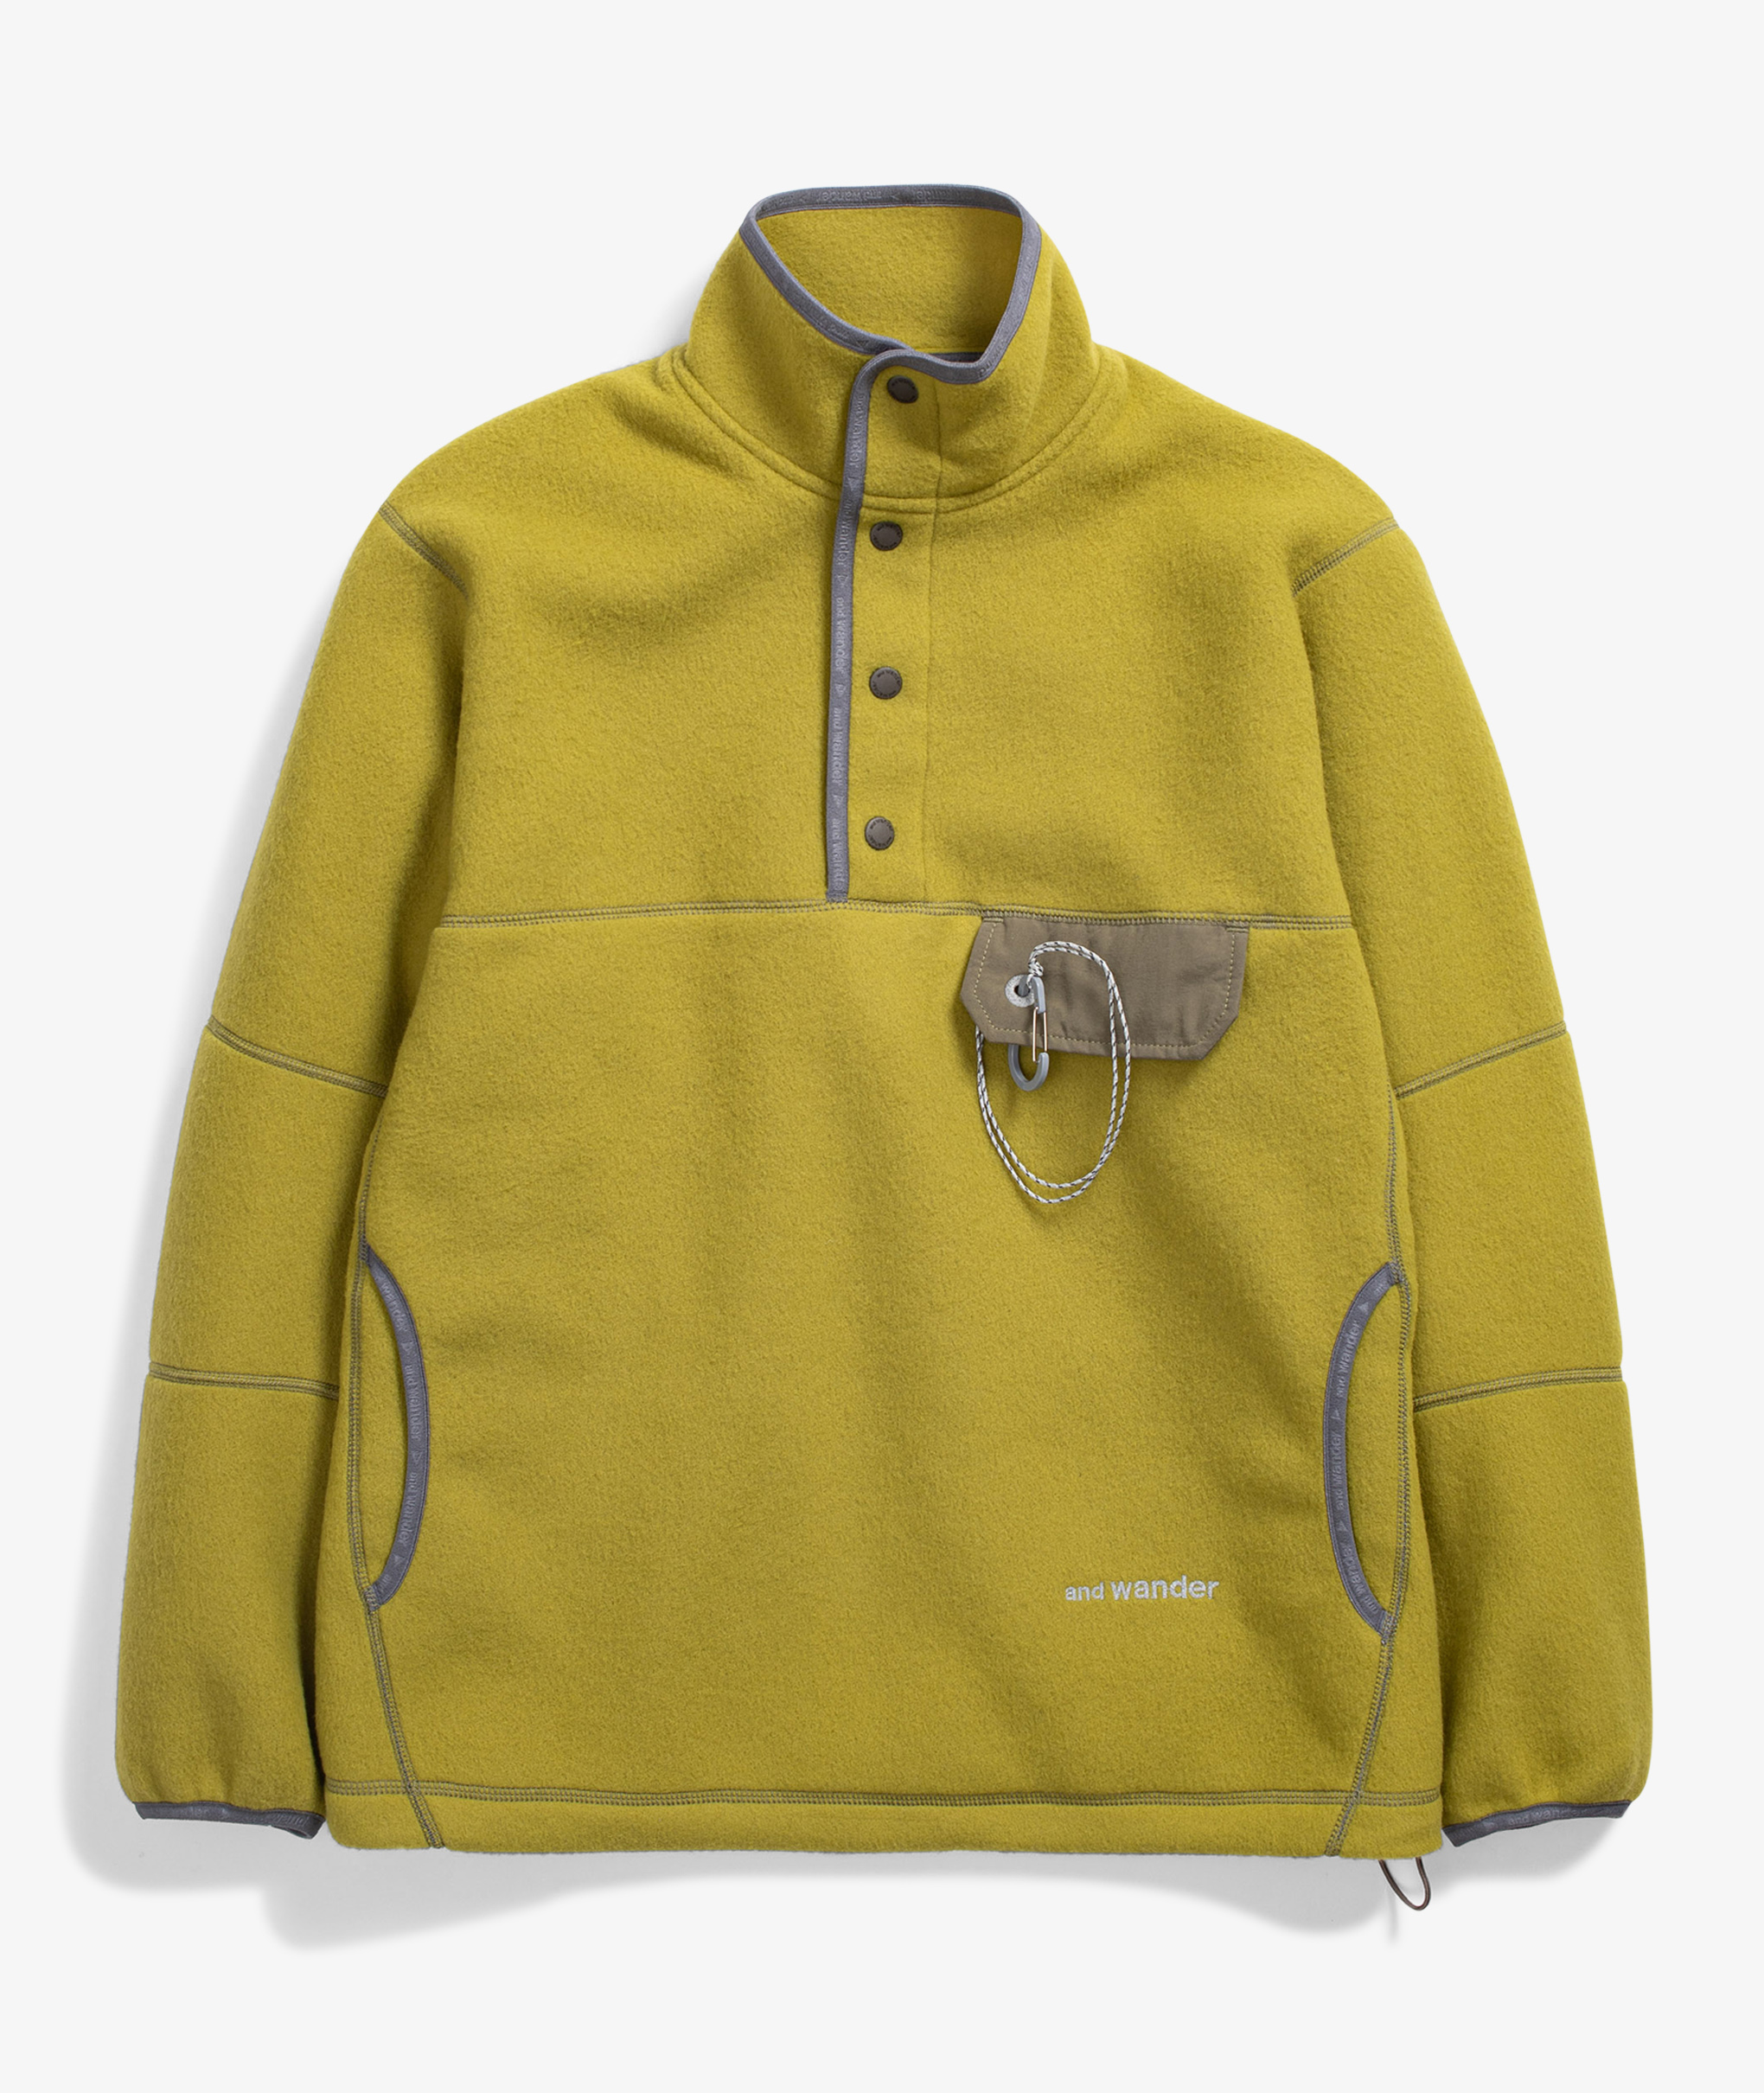 Norse Store | Shipping Worldwide - And Wander Wool Fleece Pullover